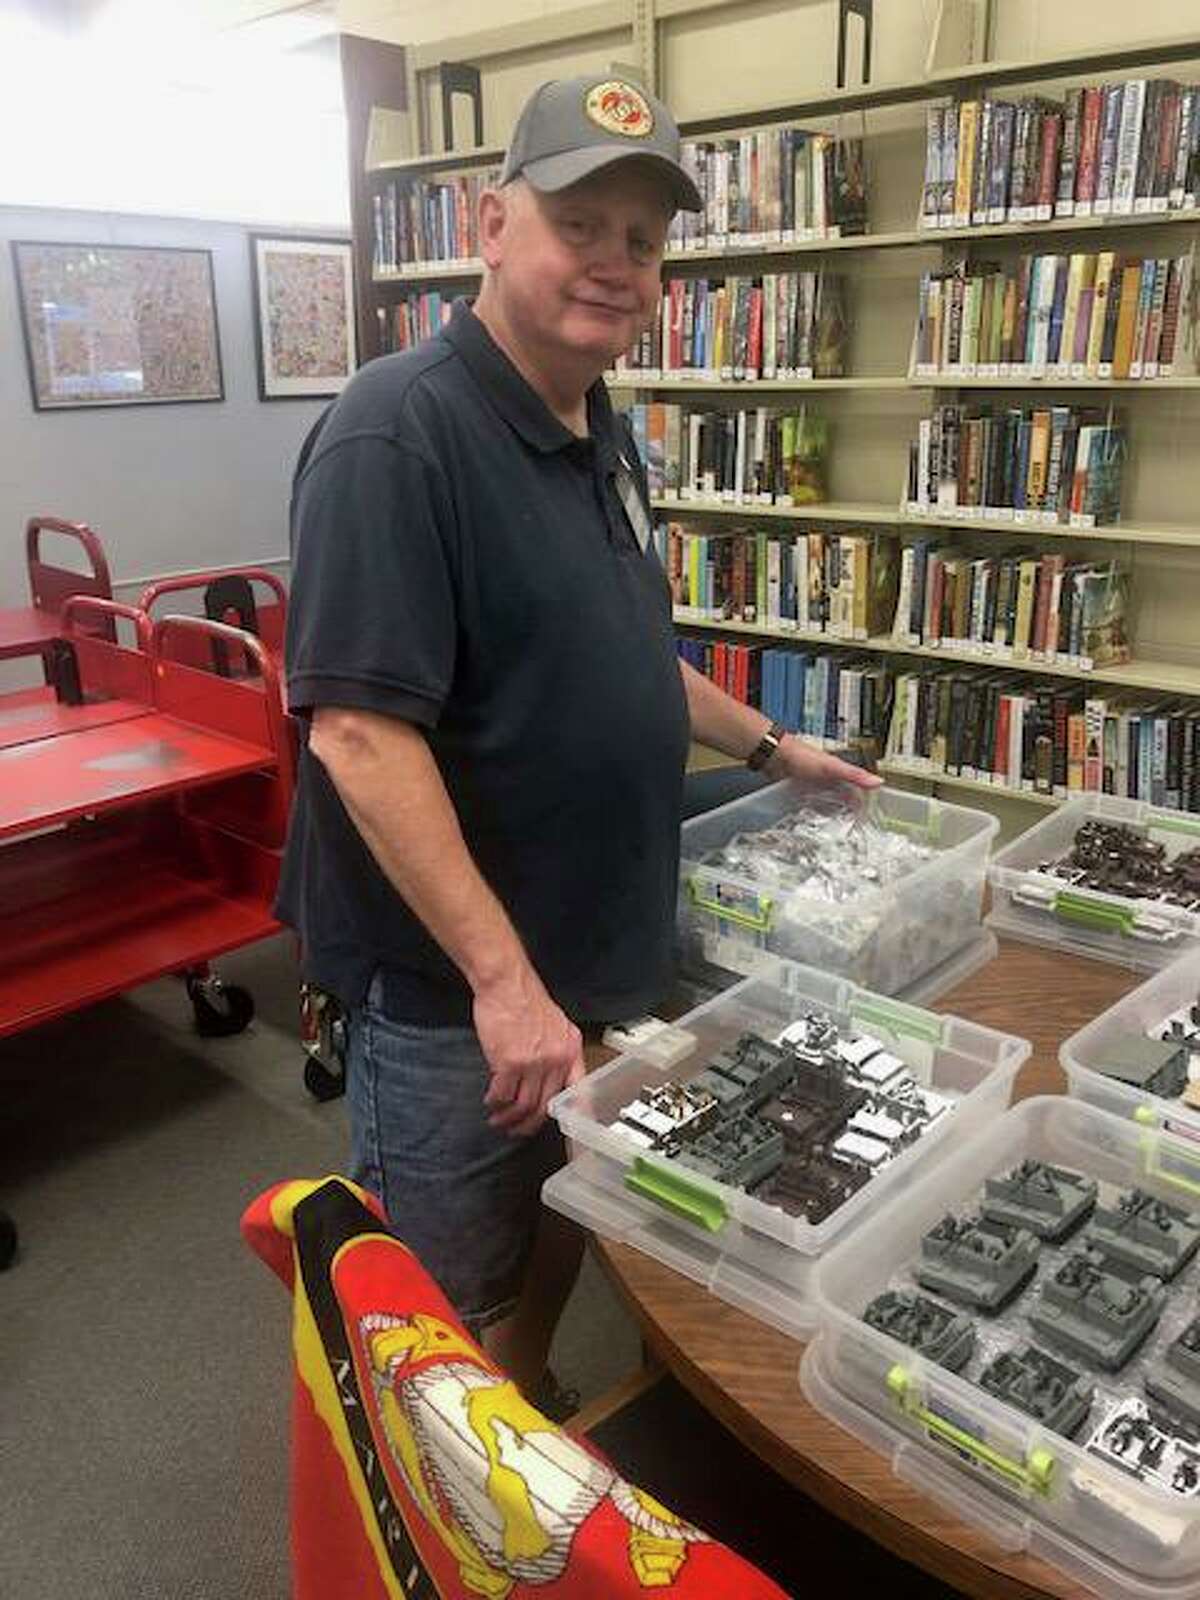 Shelton resident George Neubauer will have an exhibit of his handmade war memorabilia at the Plumb Memorial Library this month.